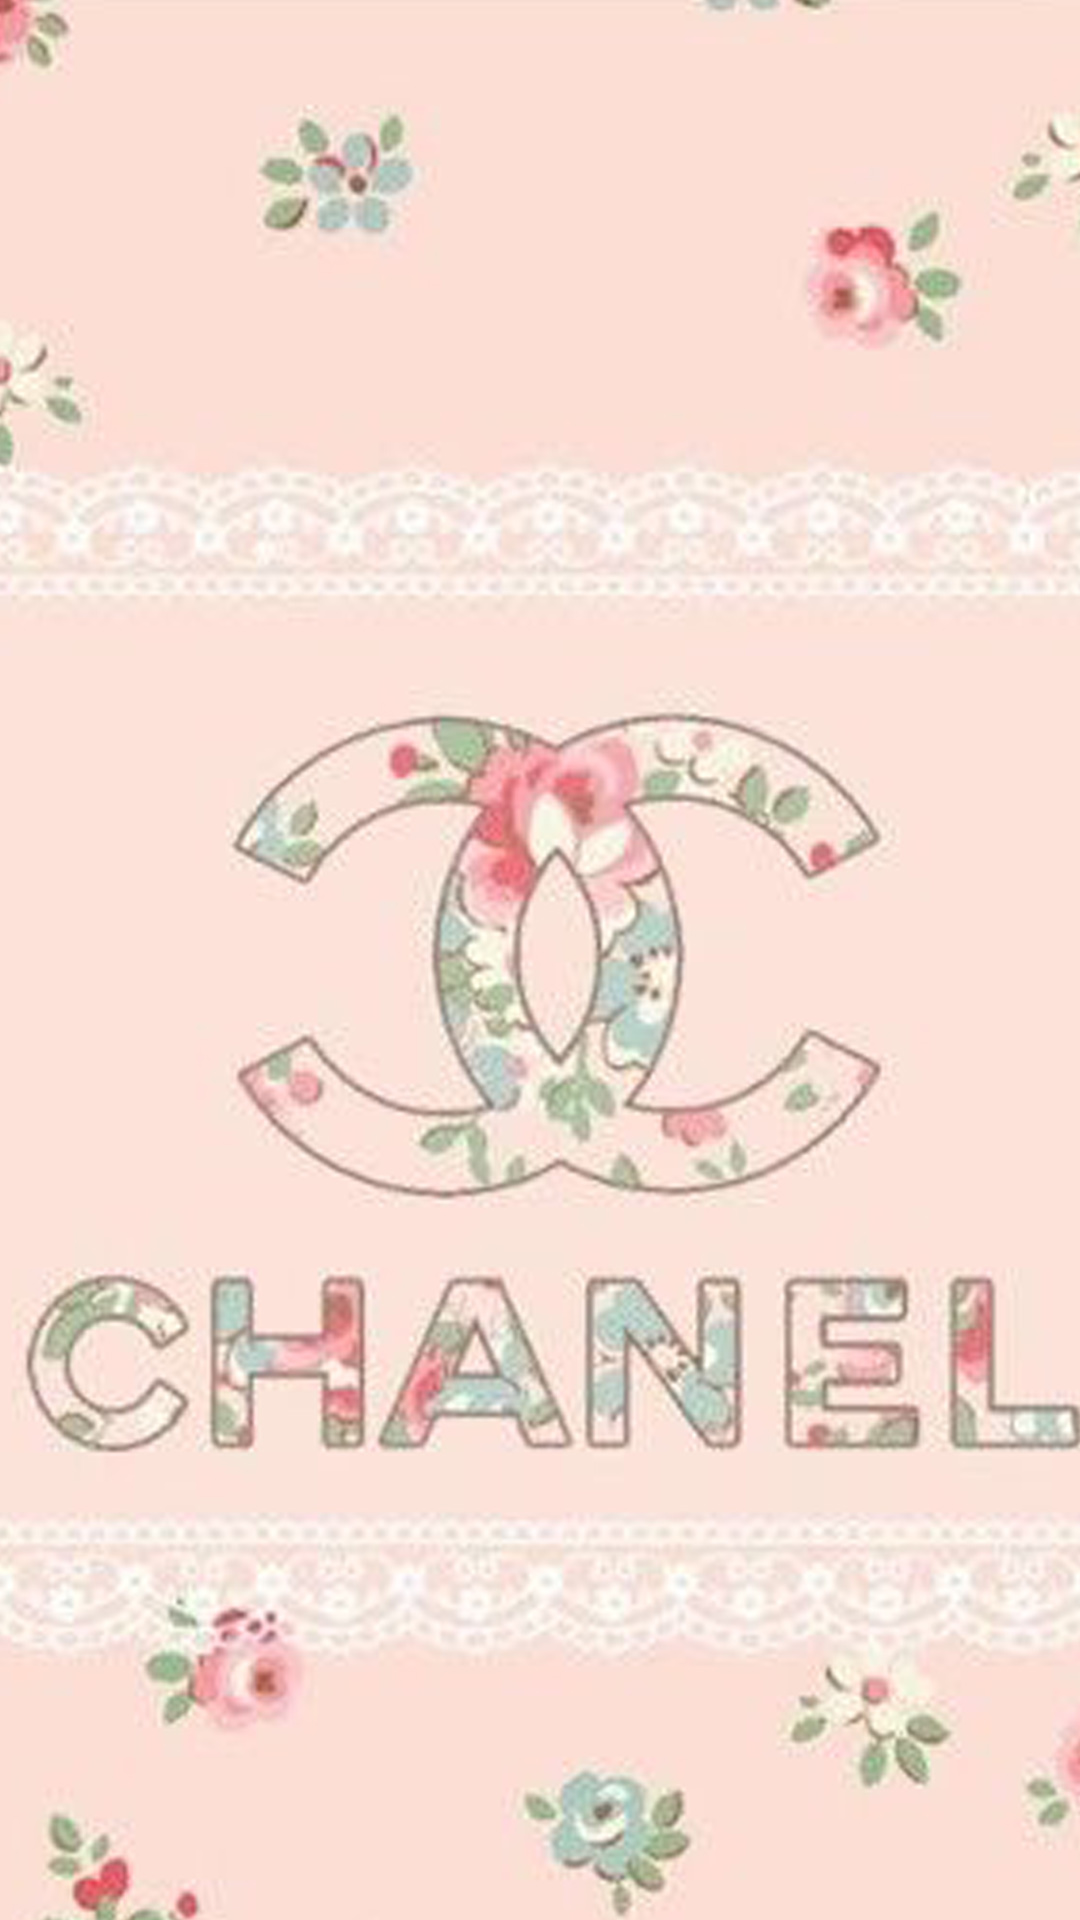 Chanel iPhone Wallpapers HD